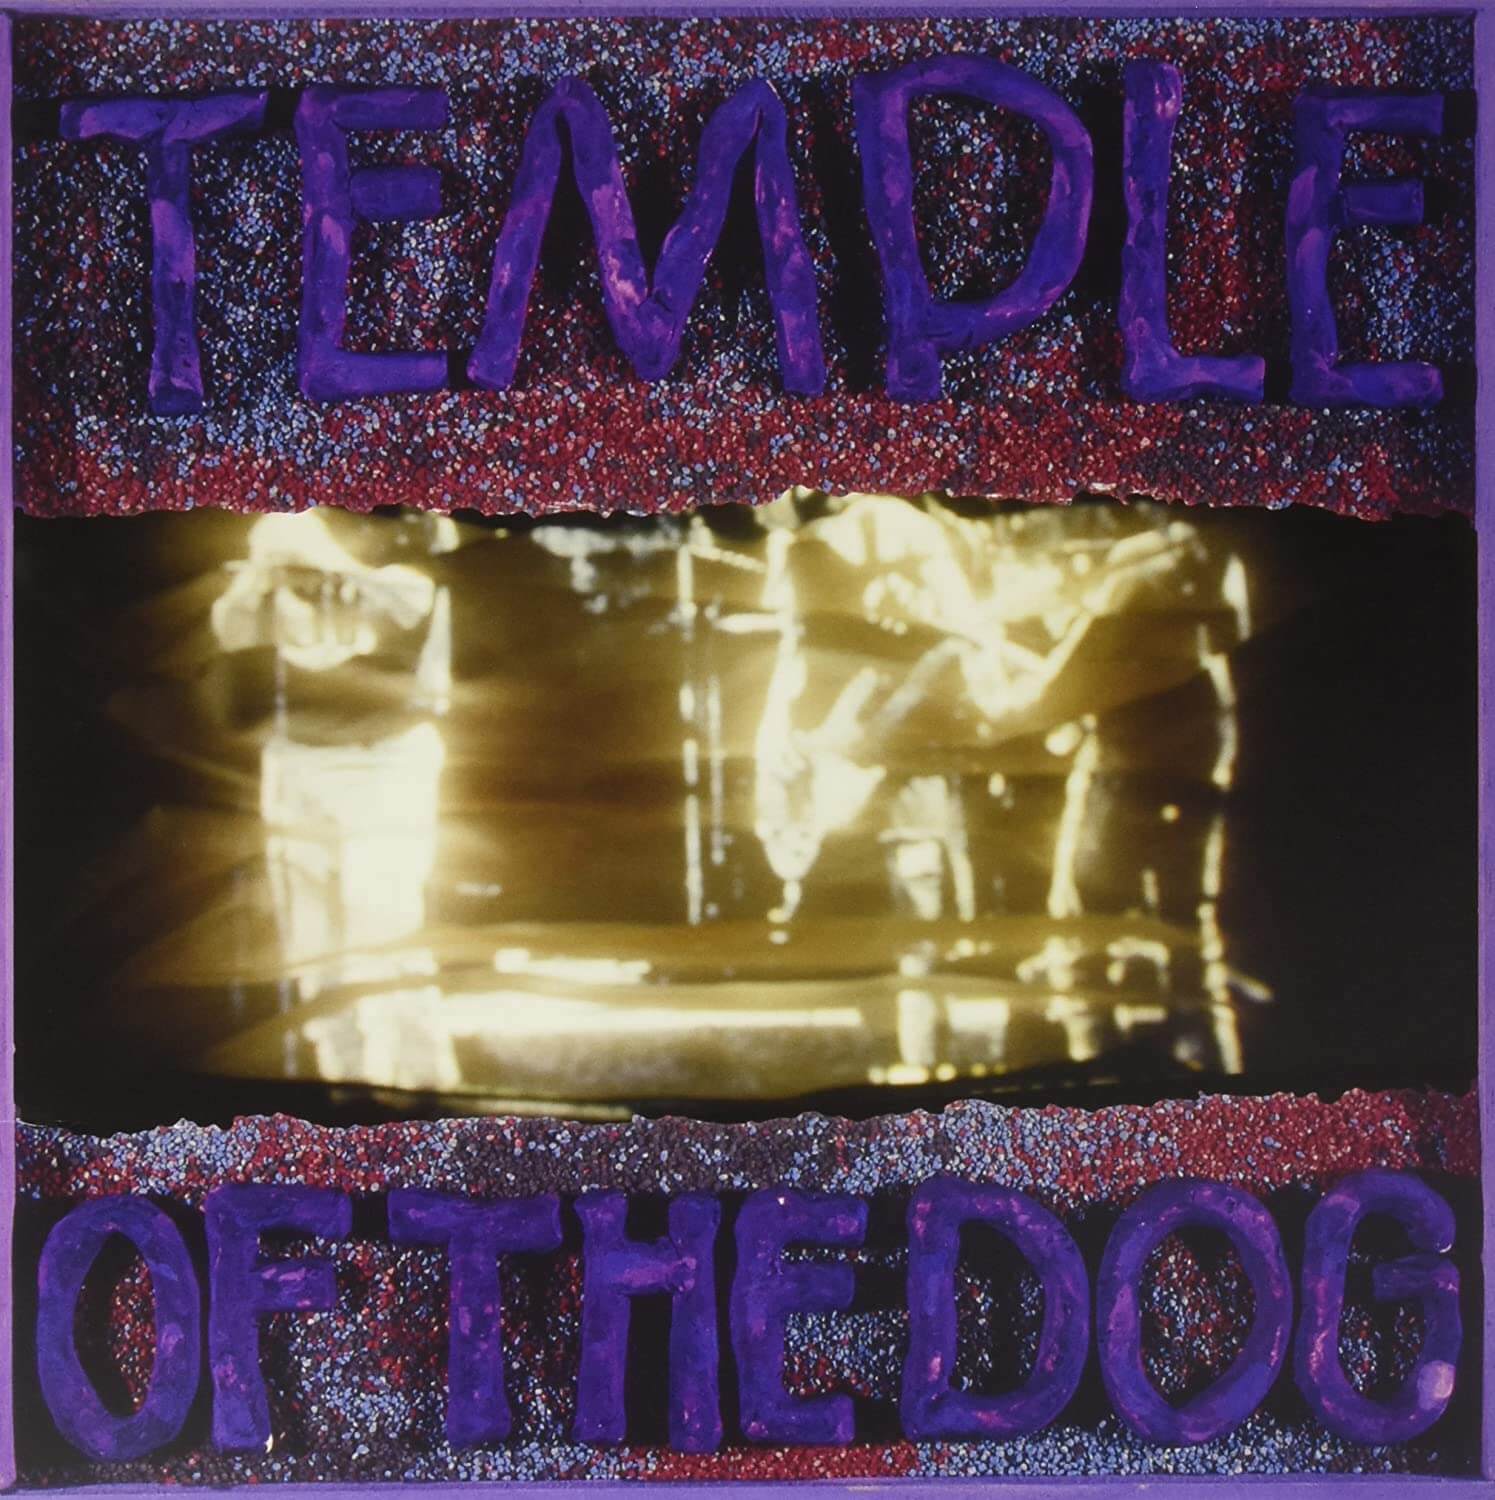 Temple of the Dog - "Temple of the Dog"